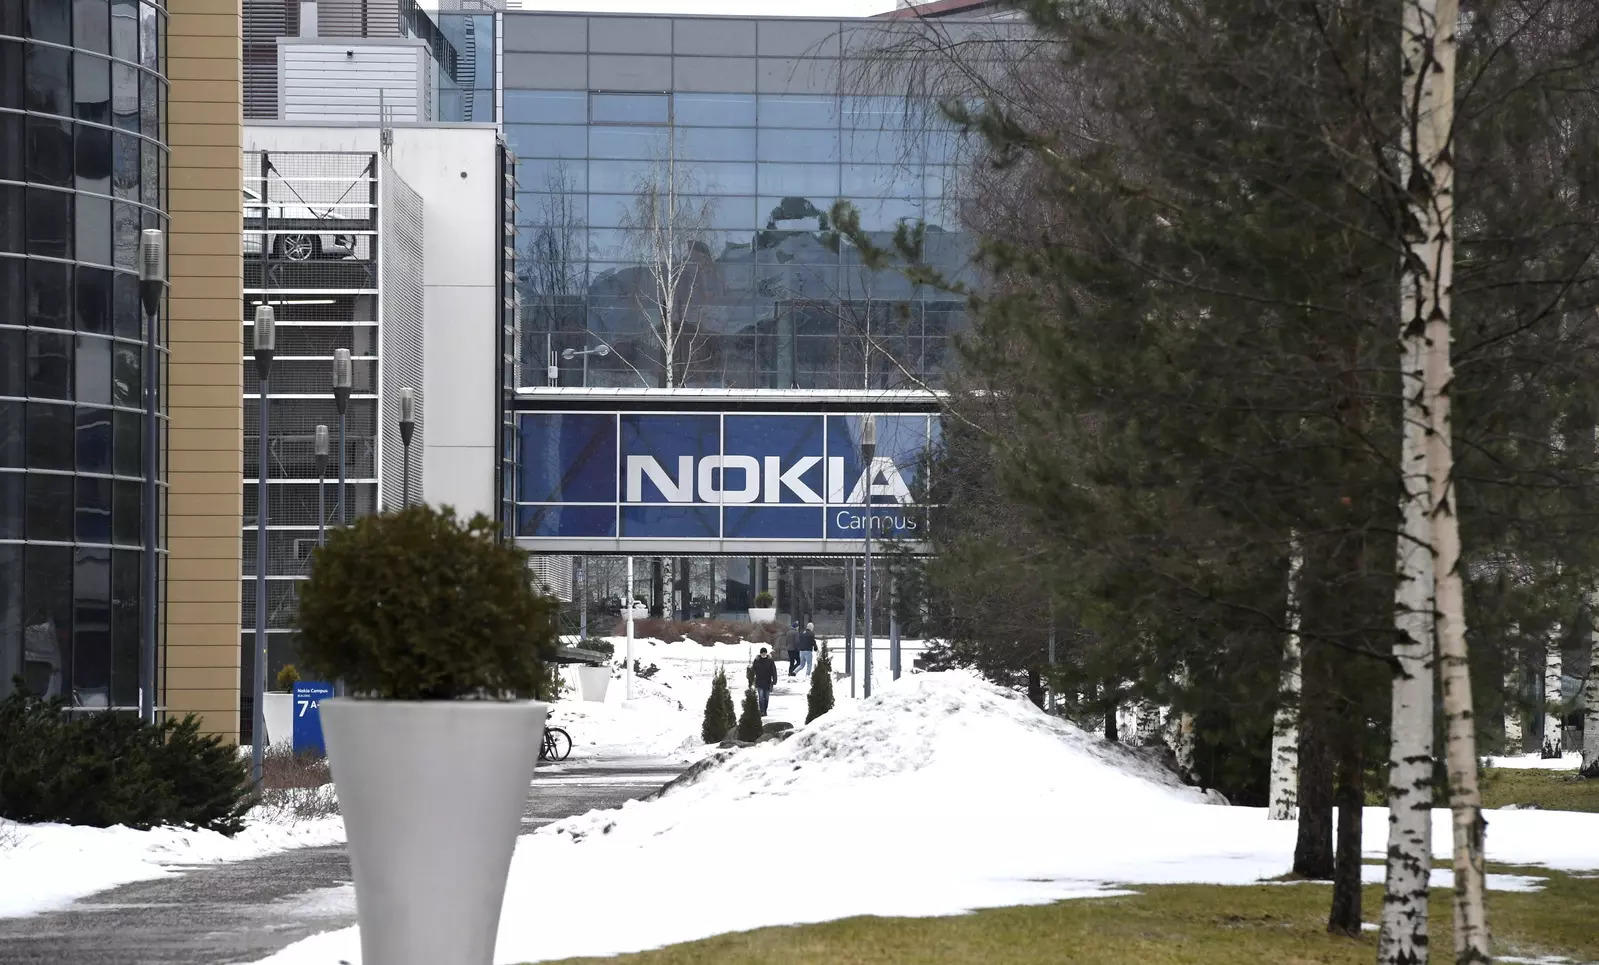 A view of the headquarters of the Finnish telecoms company Nokia in Espoo, Finland March 16, 2021.